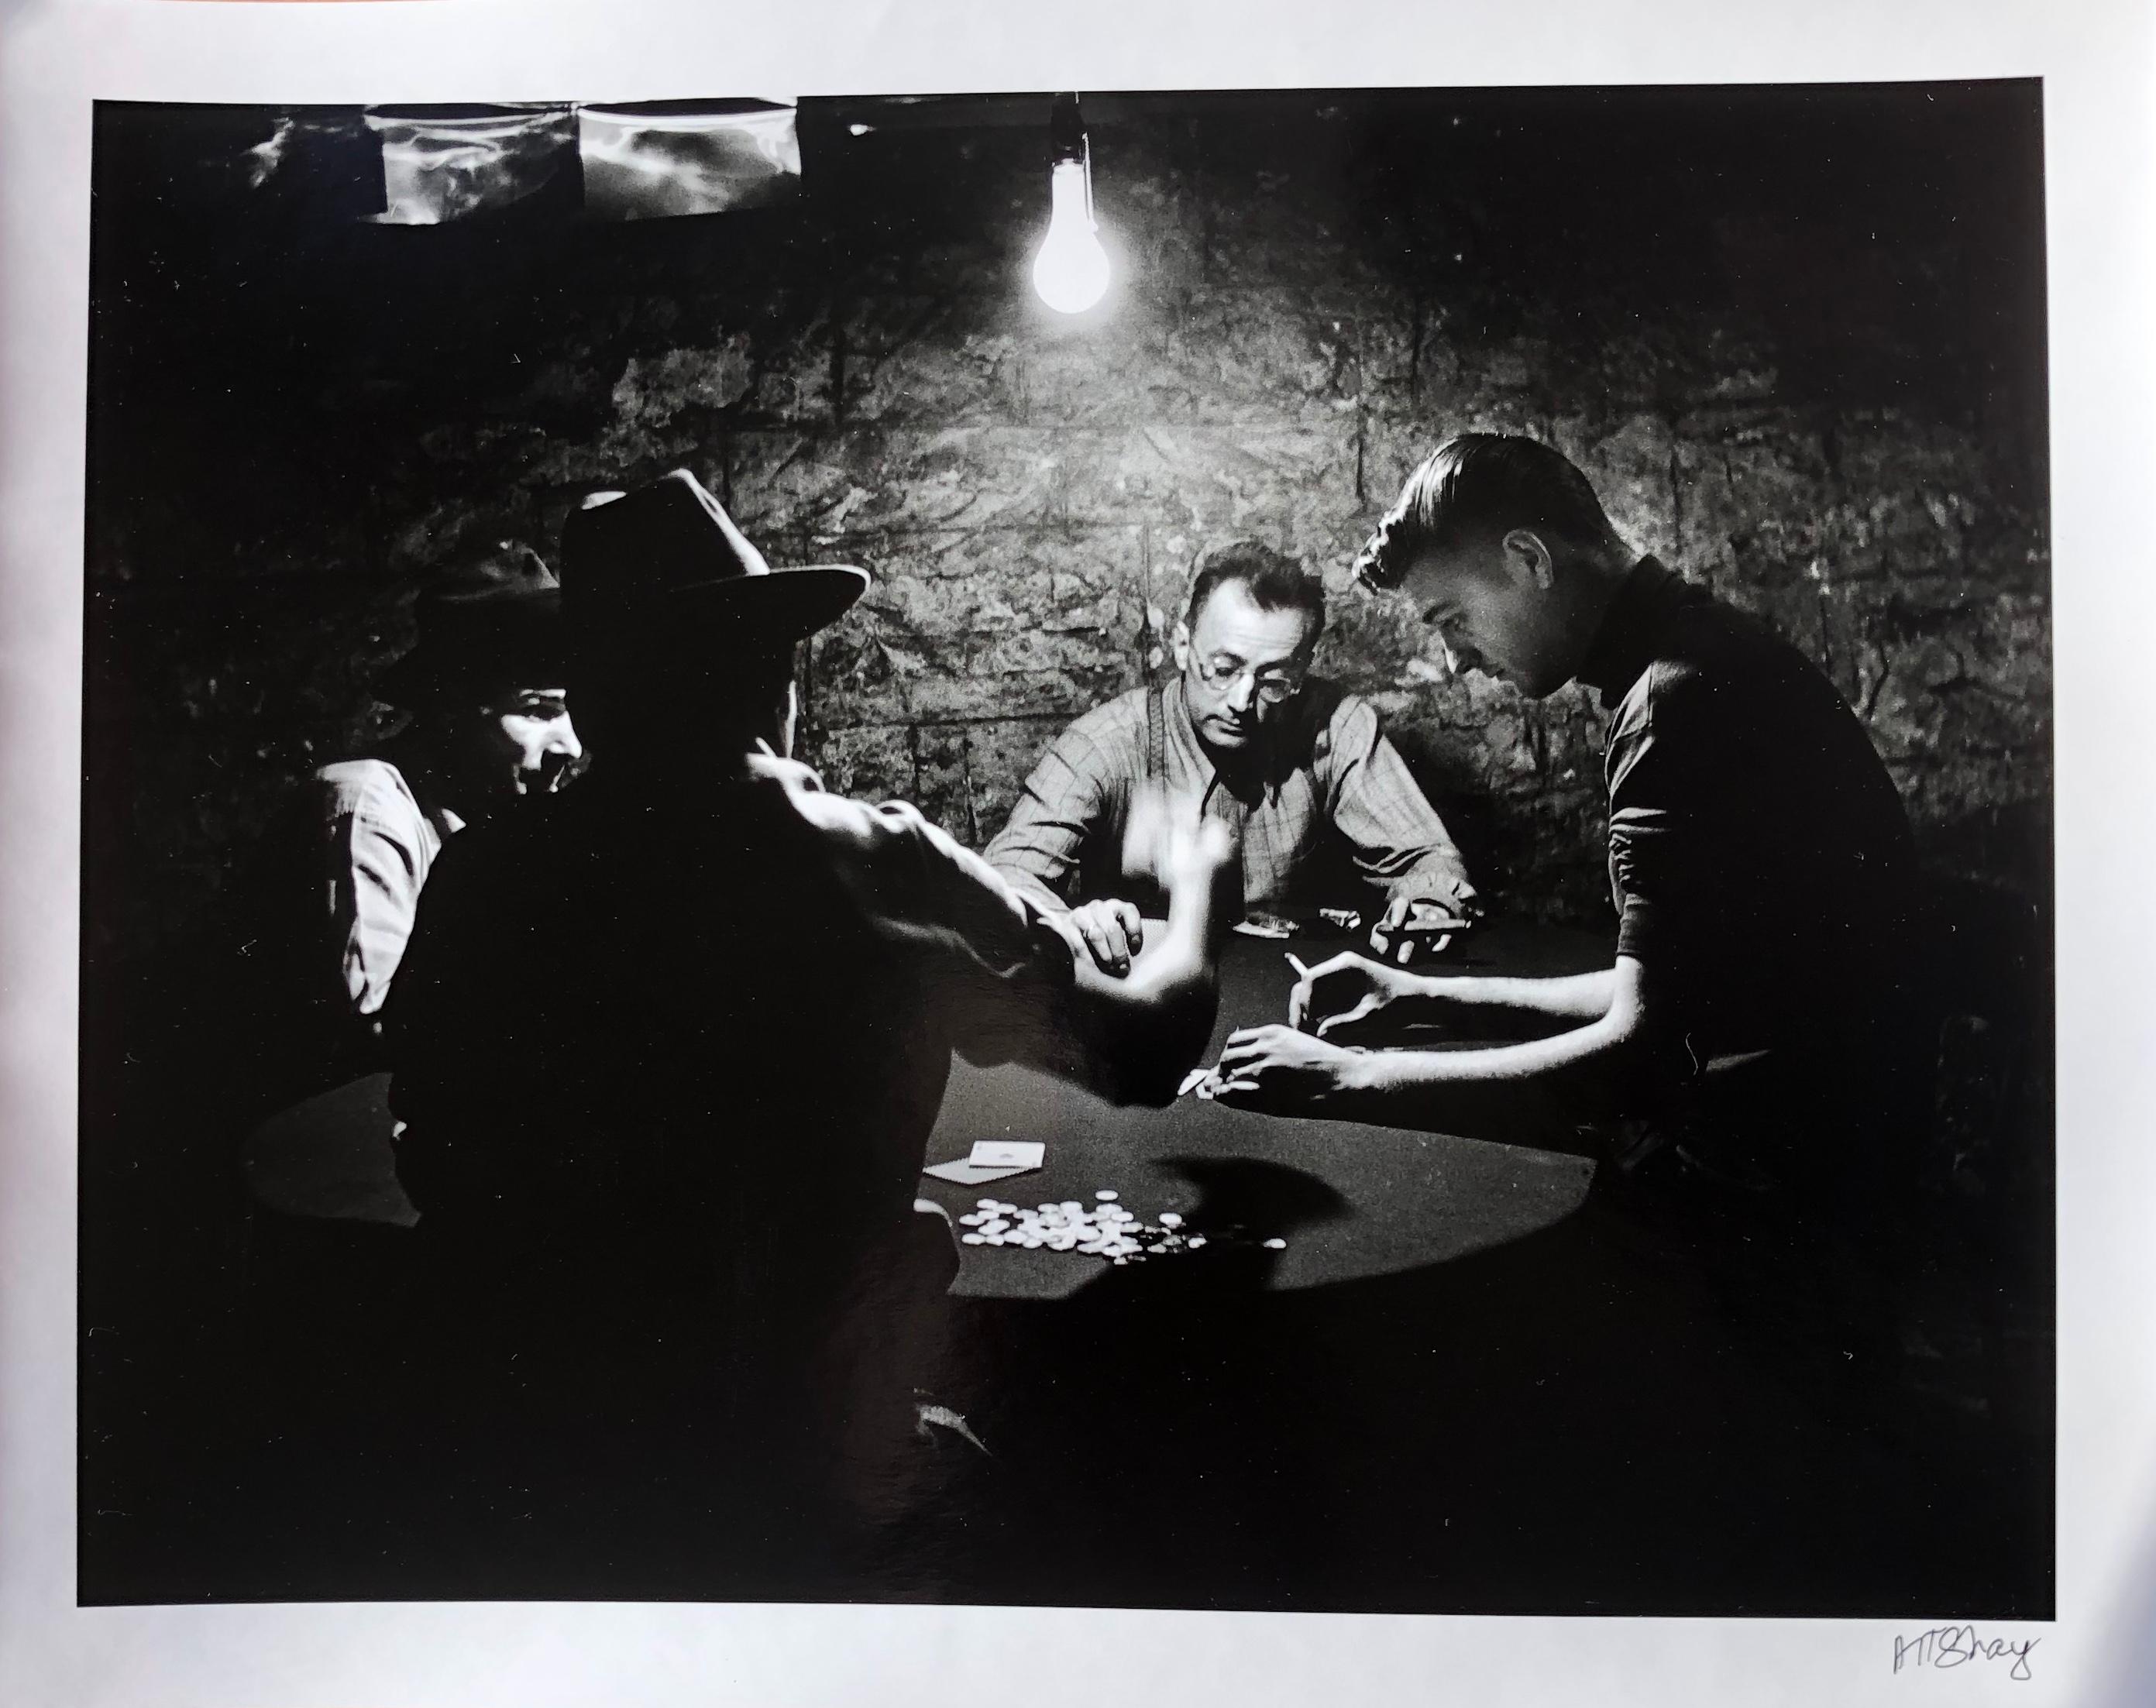 The Man With the Golden Arm, 1949, Nelson Algren as the Dealer, Silver Gelatin - Photograph by Art Shay